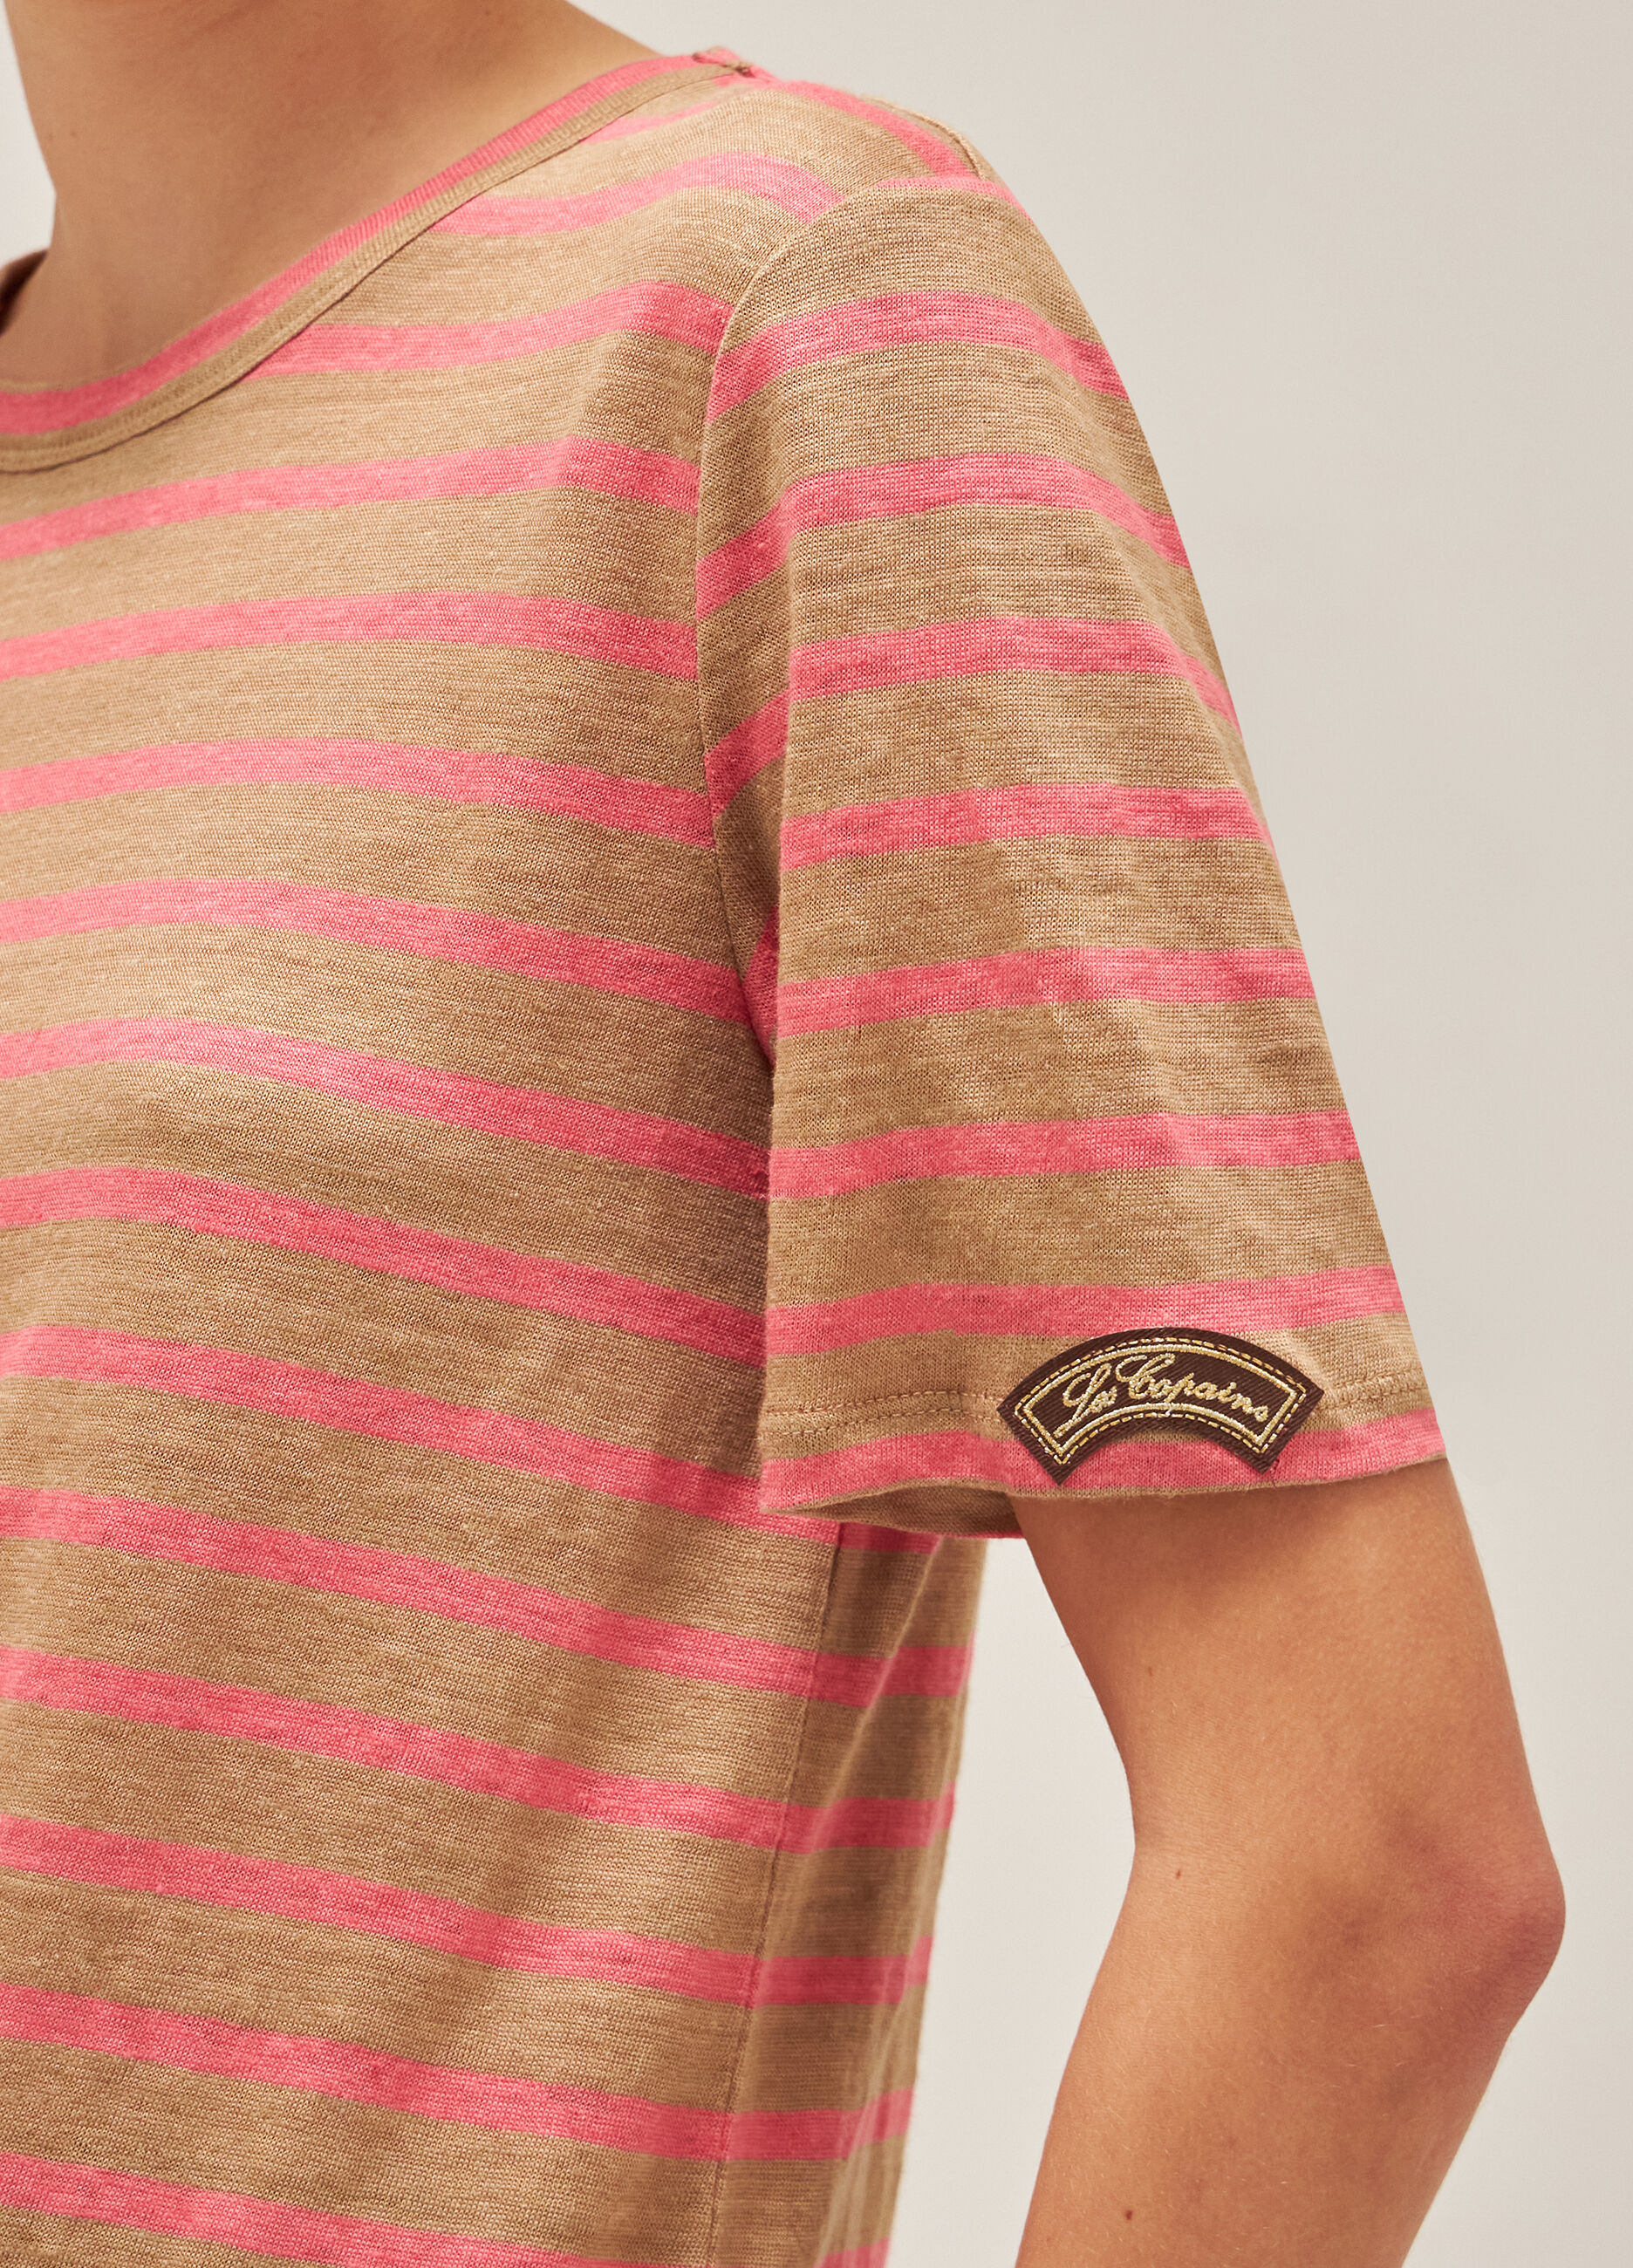 Pink and brown striped linen T-shirt